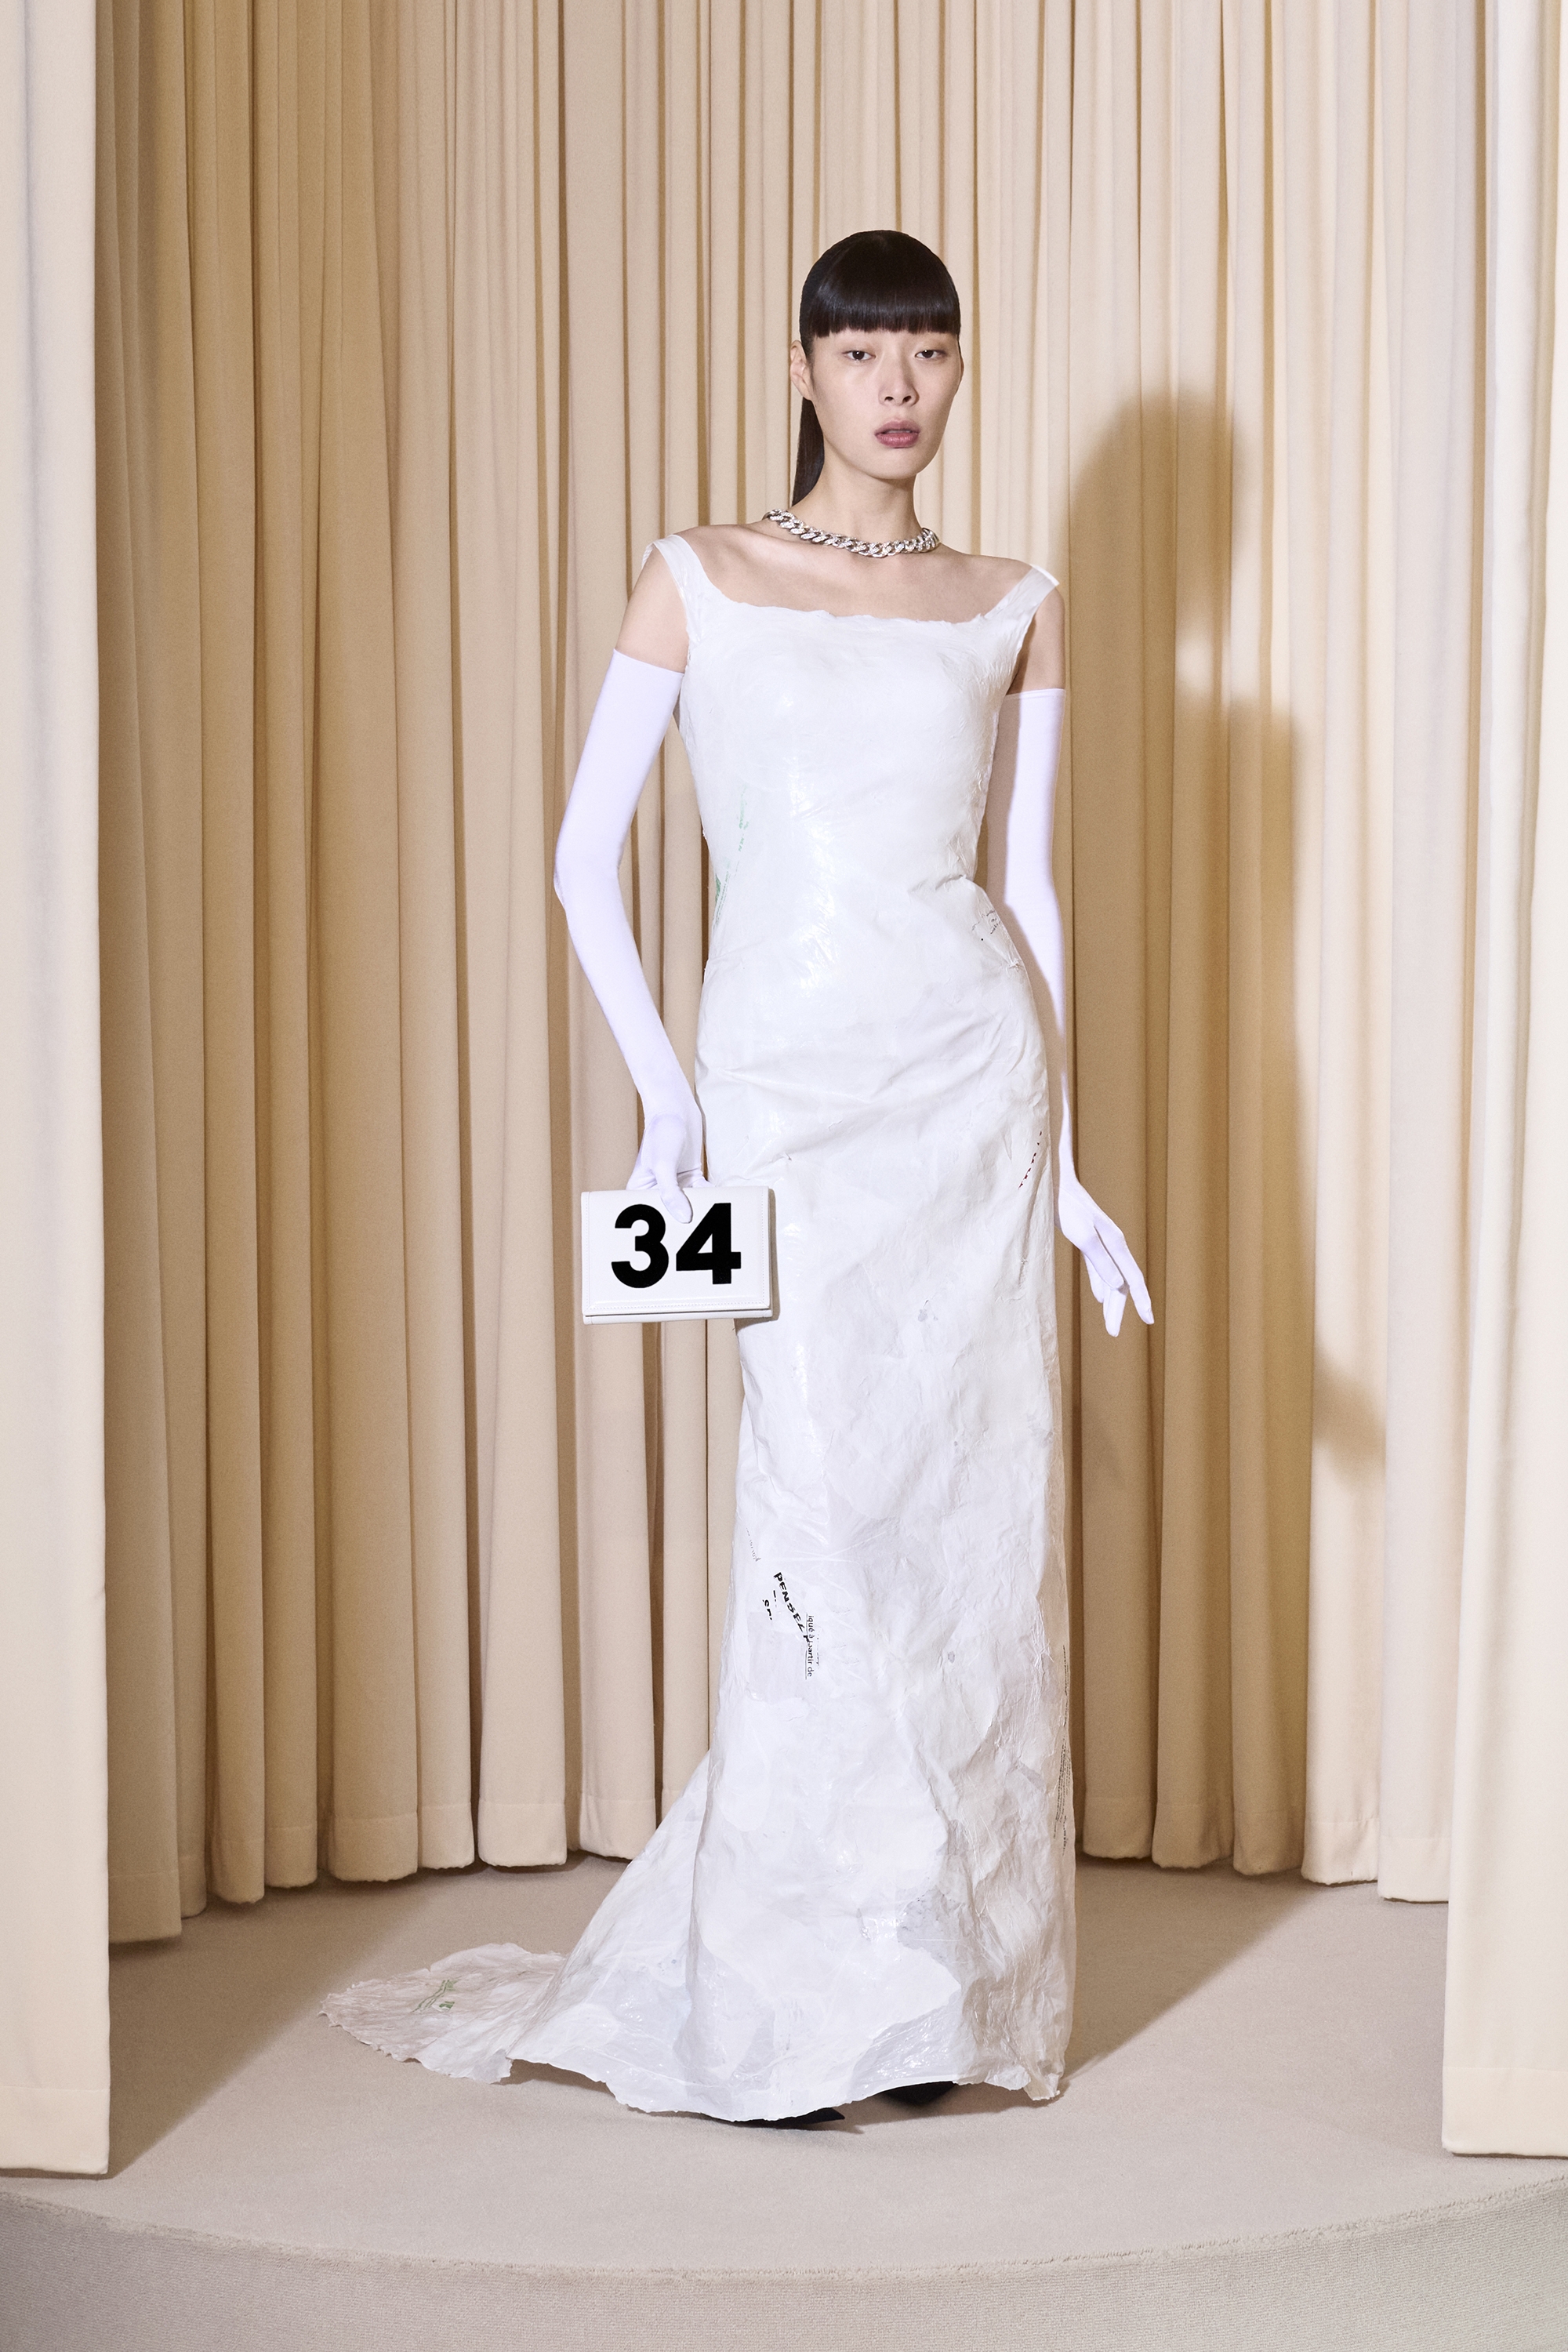 COUTURE 53RD 2X3 2000x3000 0022 Balenciaga Couture24 LOOK 34 FRONT JAYPAK 6058